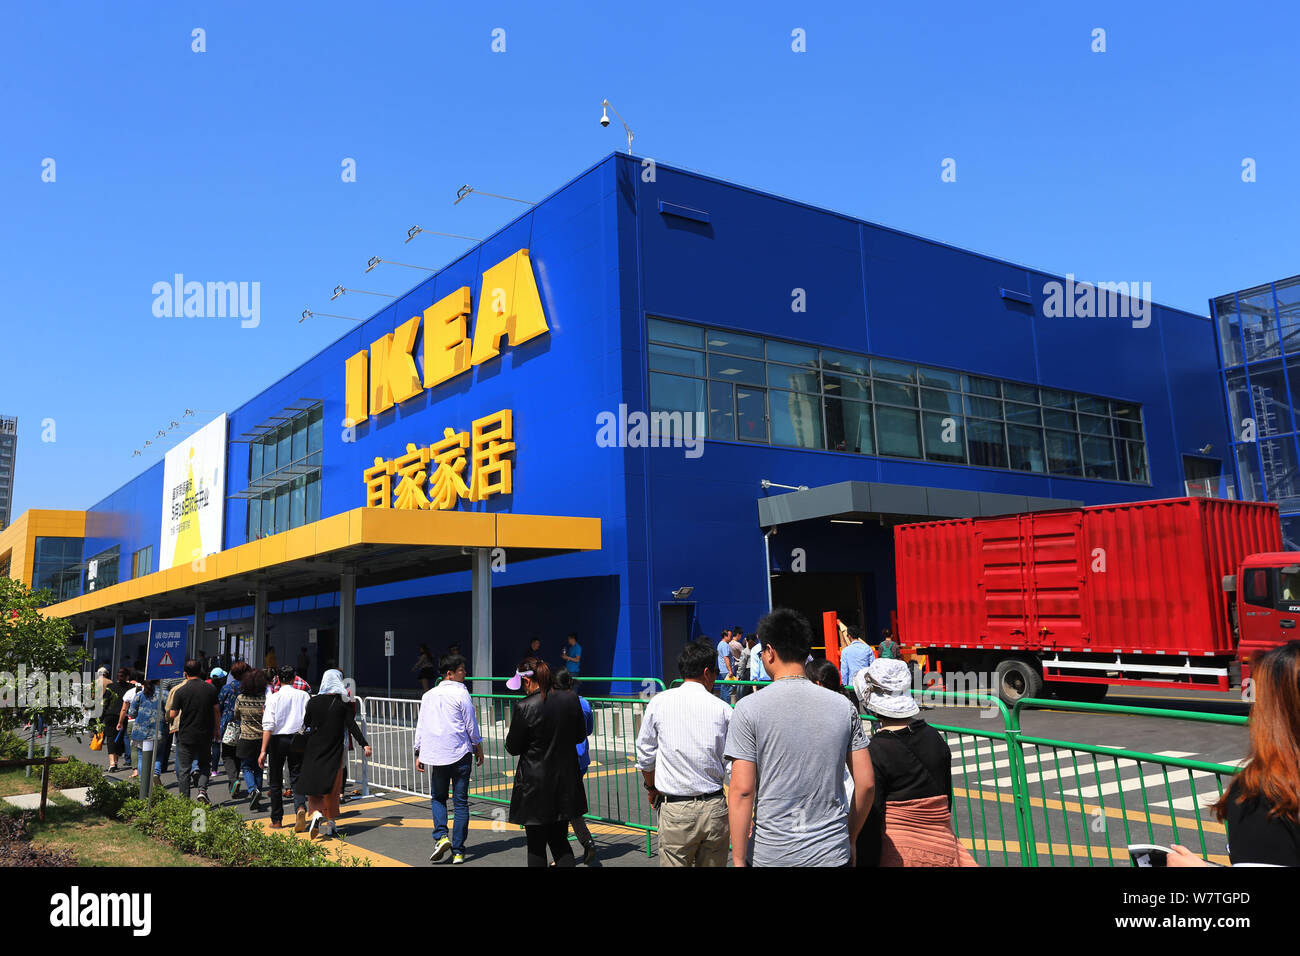 Ikea Queue High Resolution Stock Photography and Images - Alamy